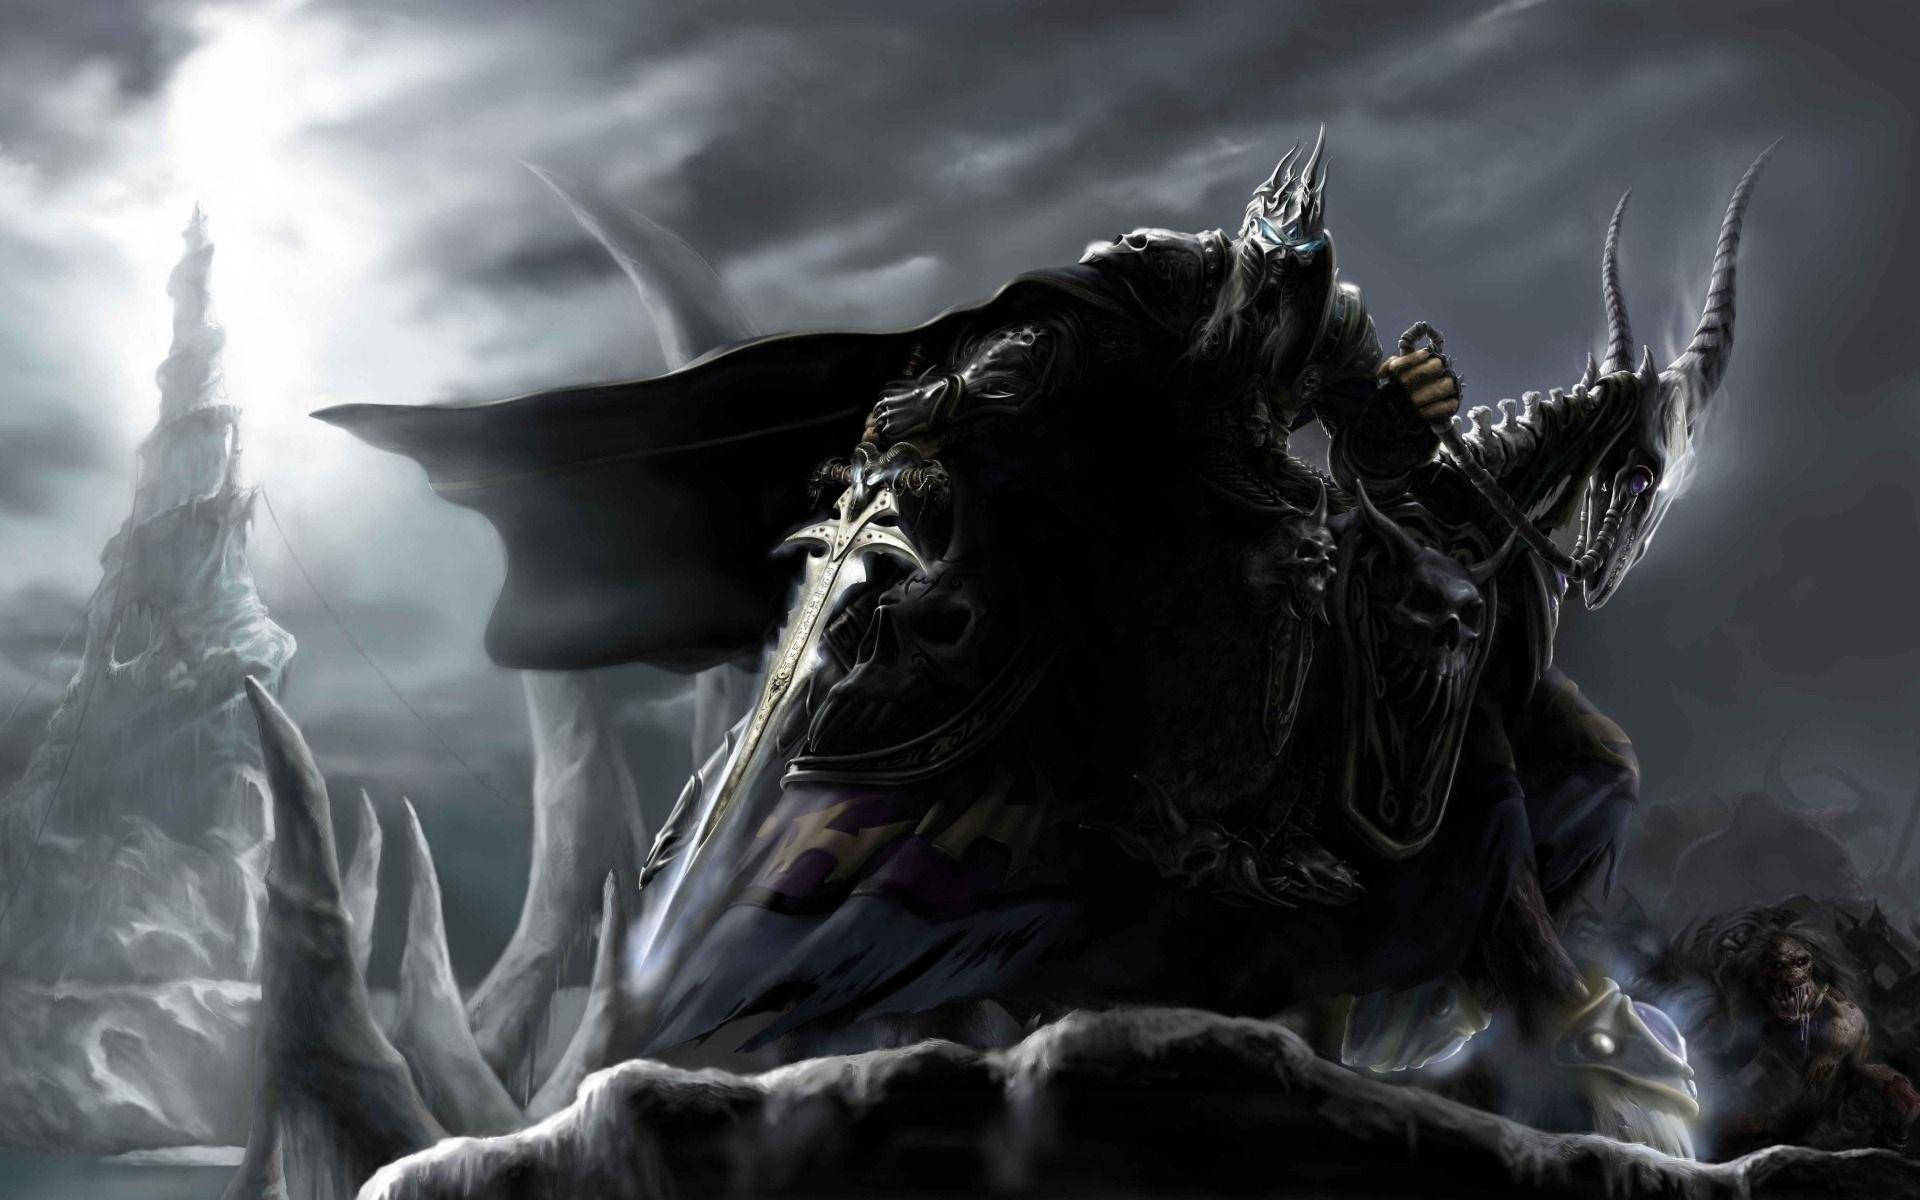 Wrath of the Lich King Classic Wallpapers - Wowhead News